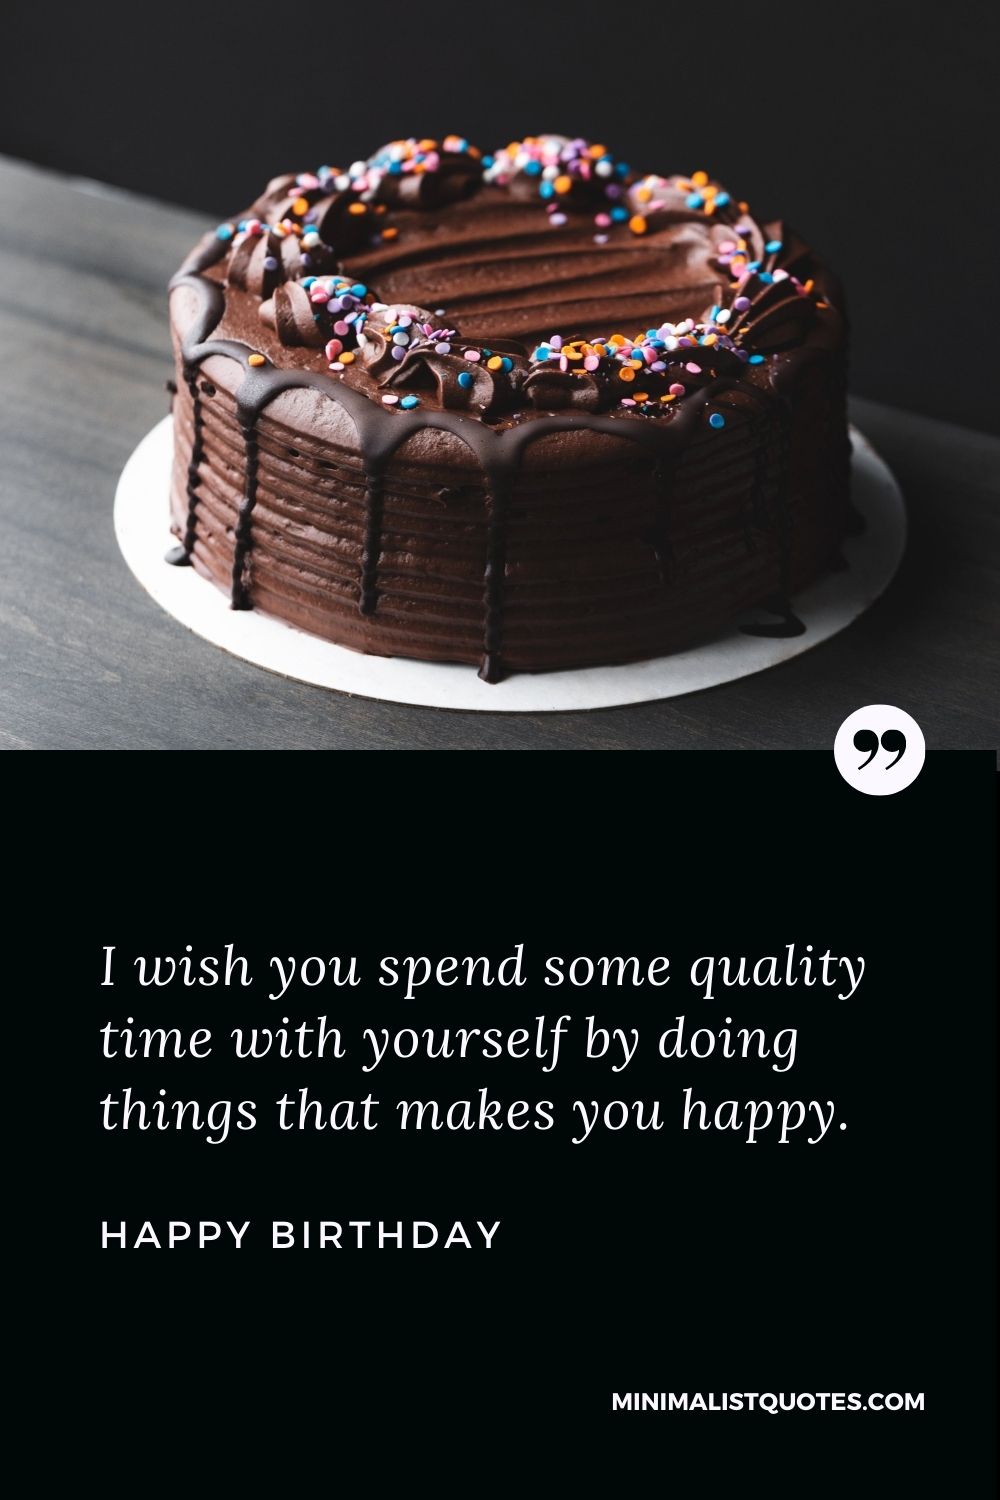 Happy Birthday Wish - I wish you spend some quality time with yourself by doing things that makes you happy.